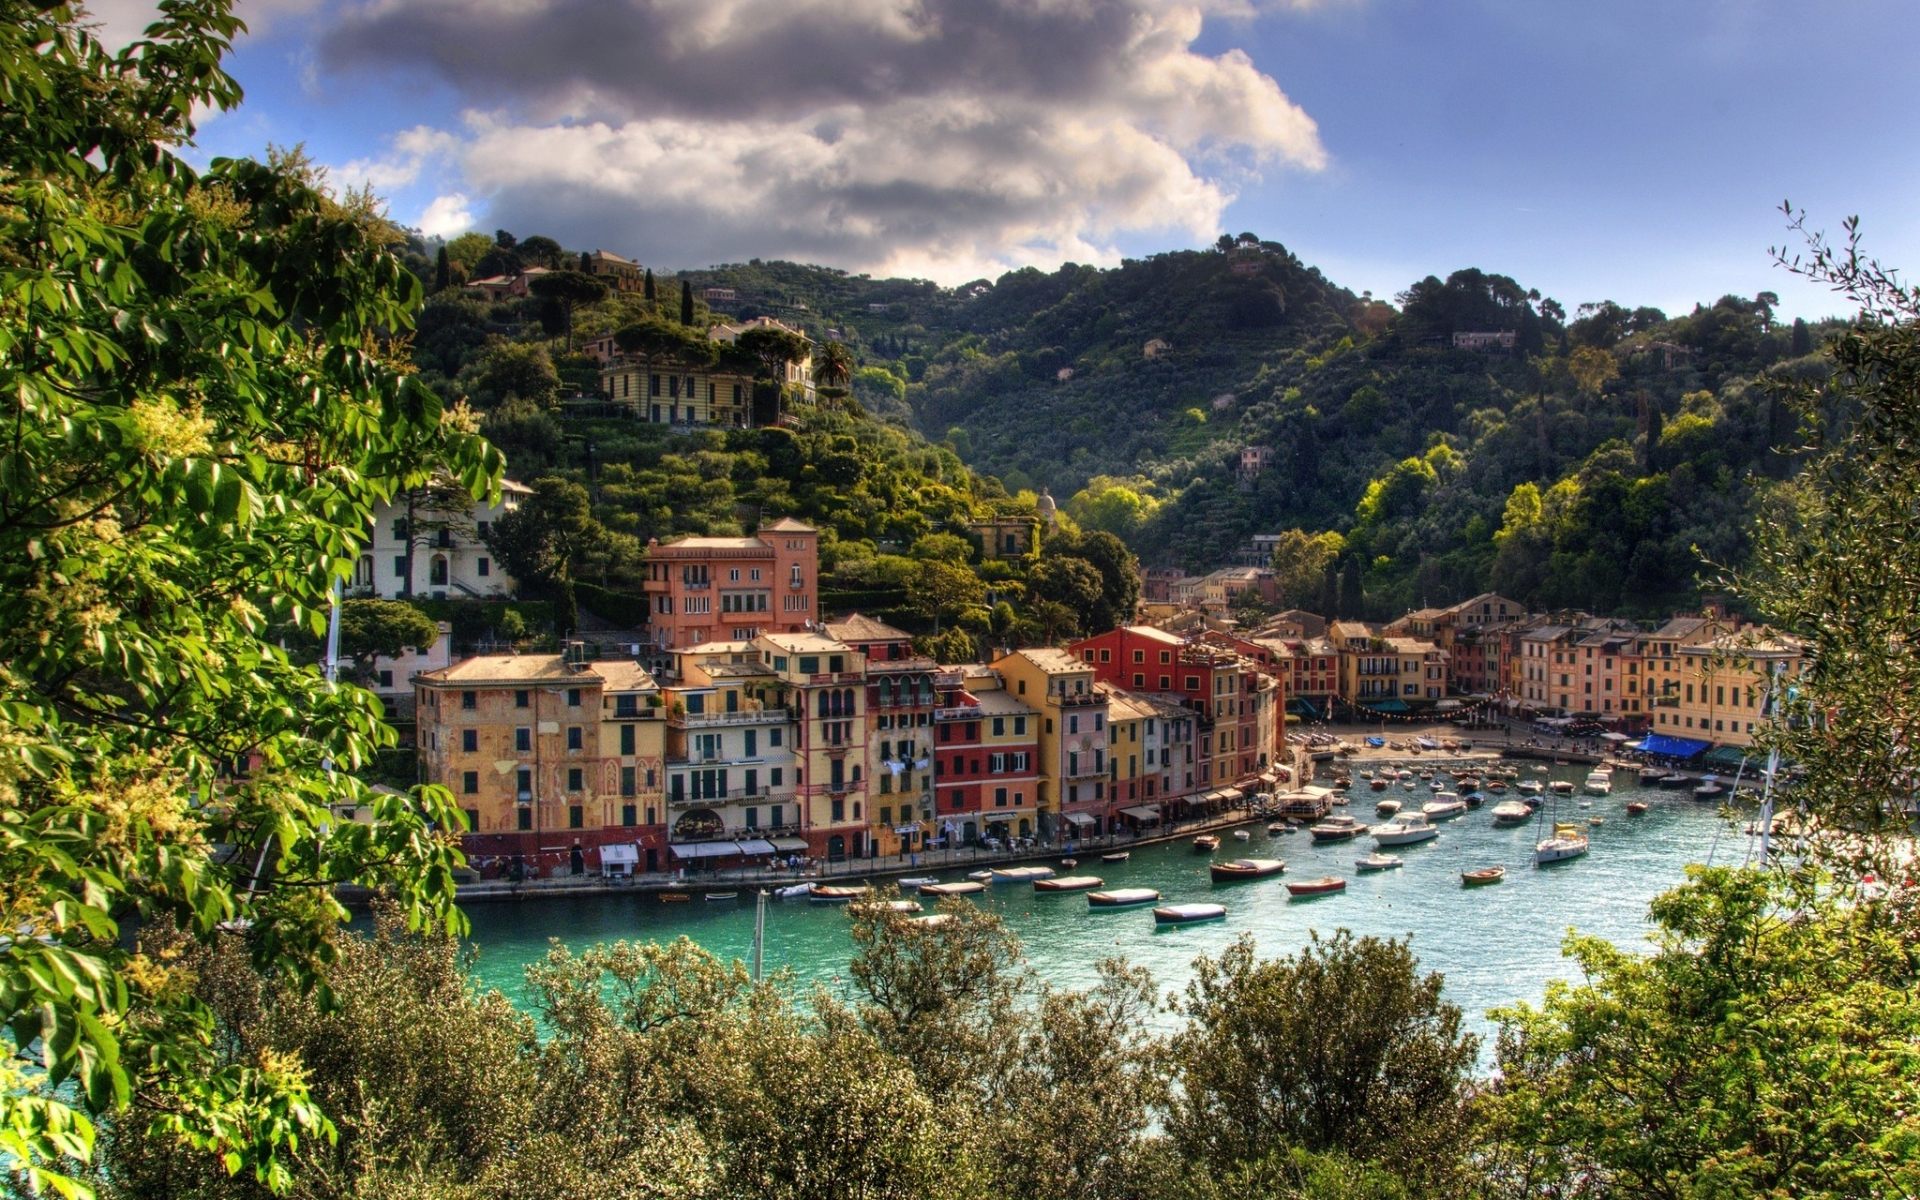 man made, riomaggiore, boat, house, italy, town, towns